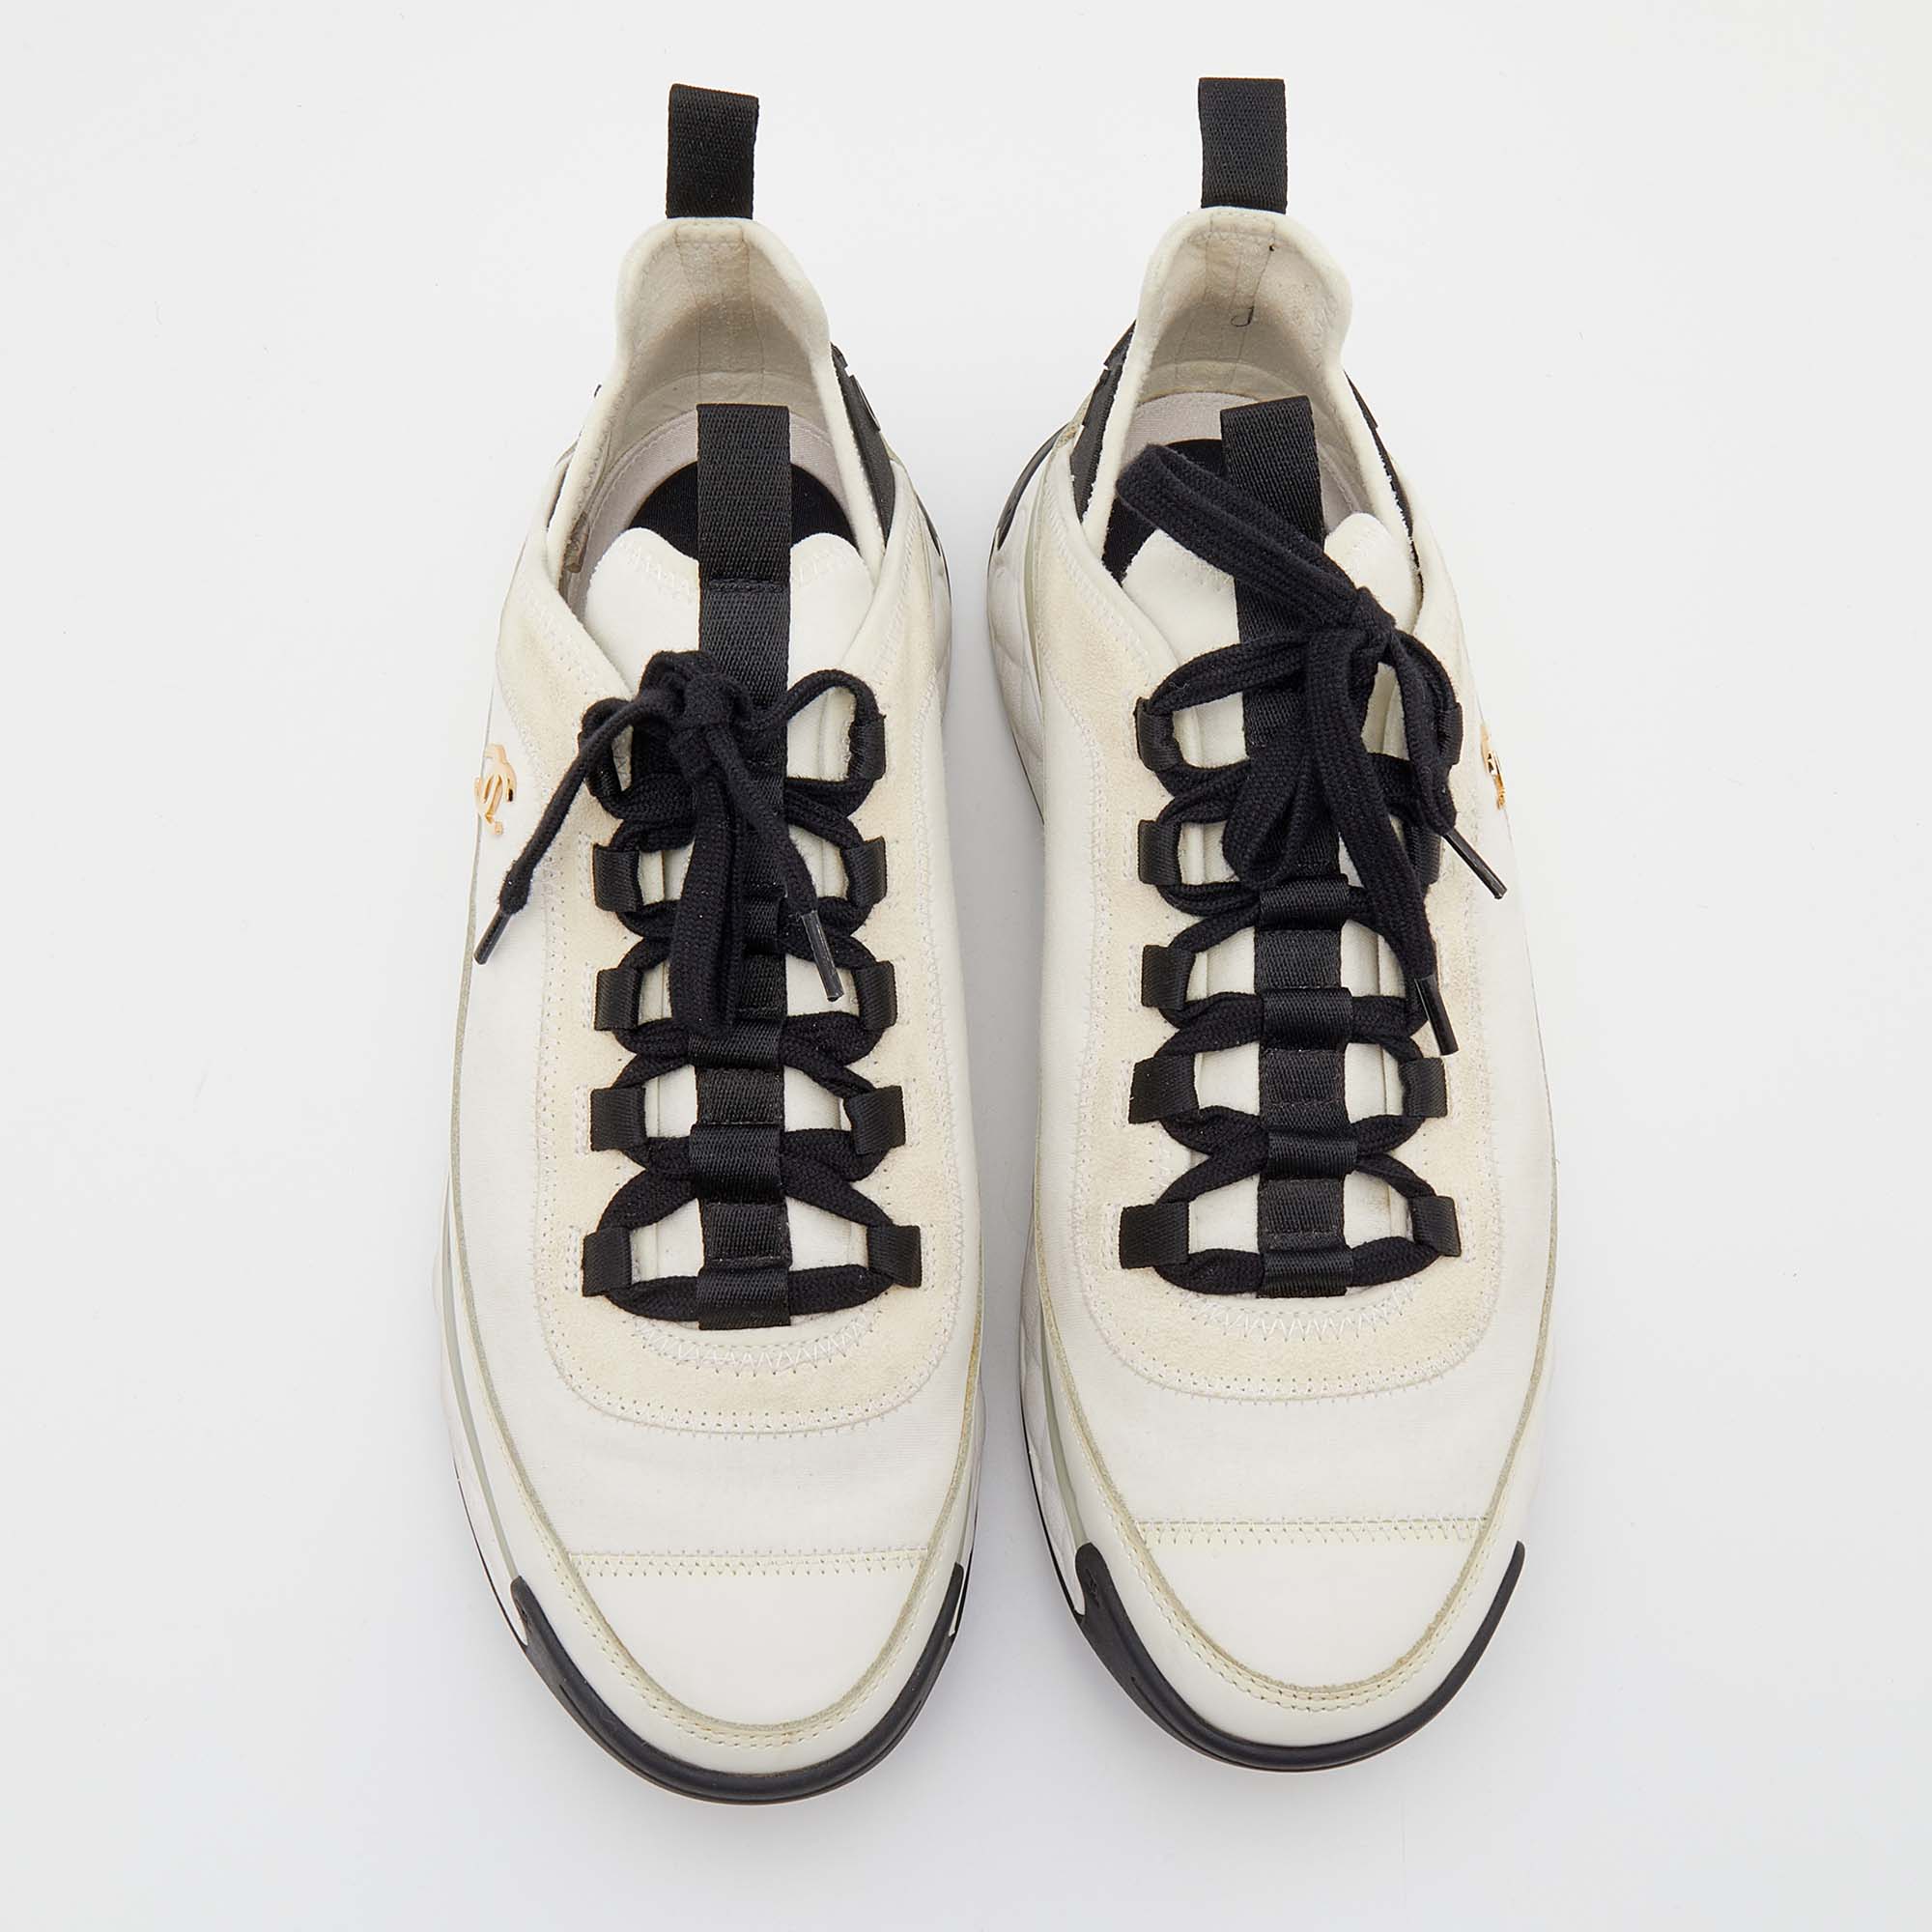 Chanel White Leather and Neoprene CC Low-Top Sneakers Size 40.5